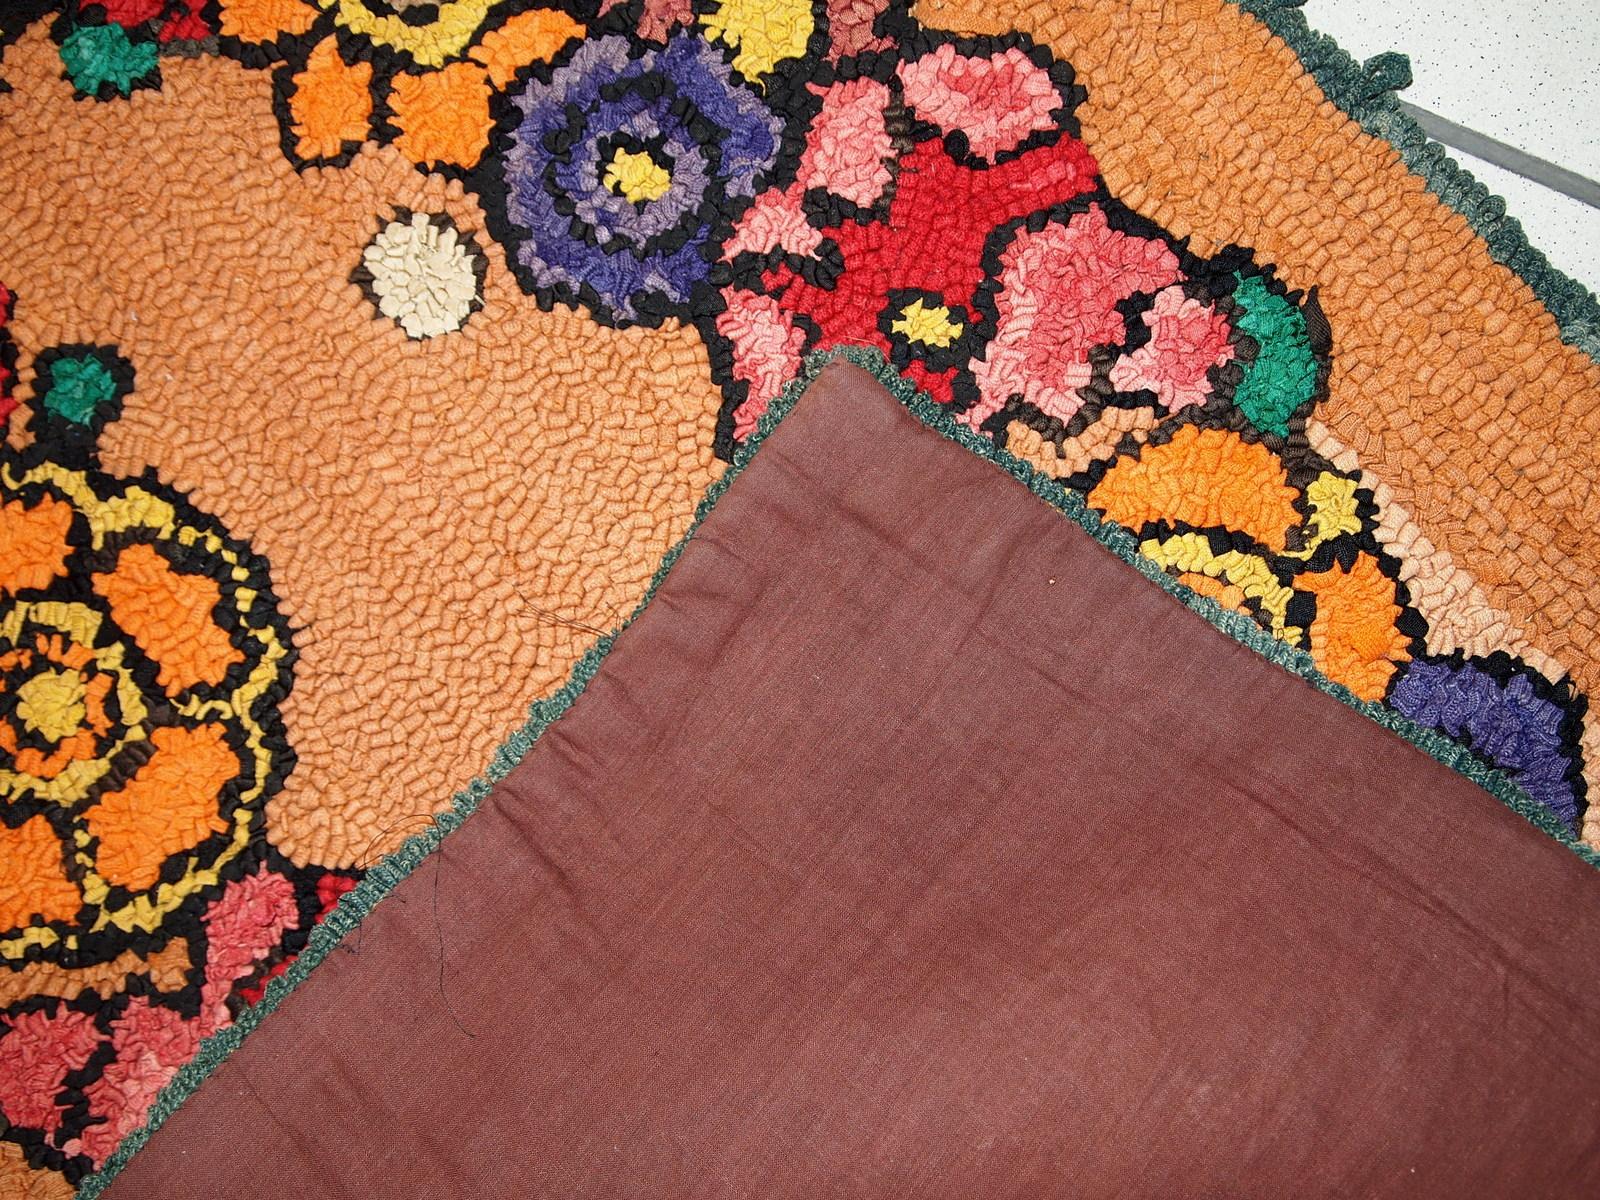 Mid-20th Century Handmade Vintage American Hooked Rug, 1940s, 1C21 For Sale